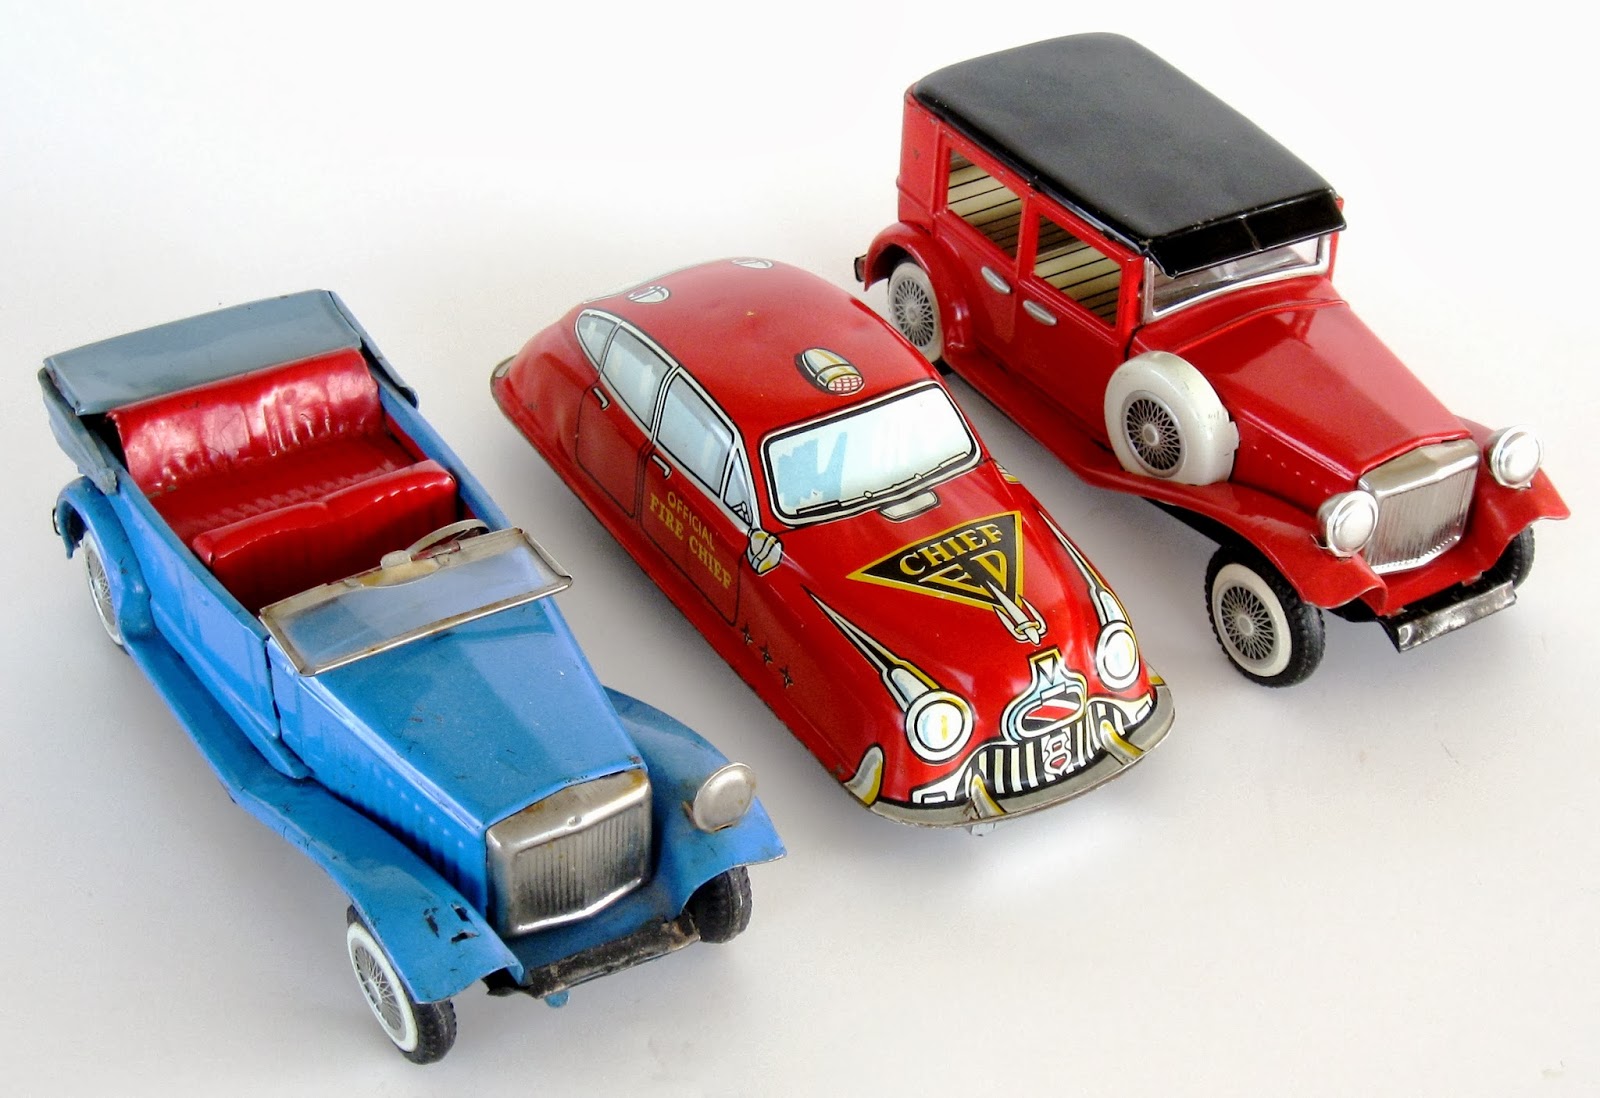 Toys and Stuff: Marx Tin-litho Official Fire Chief Car